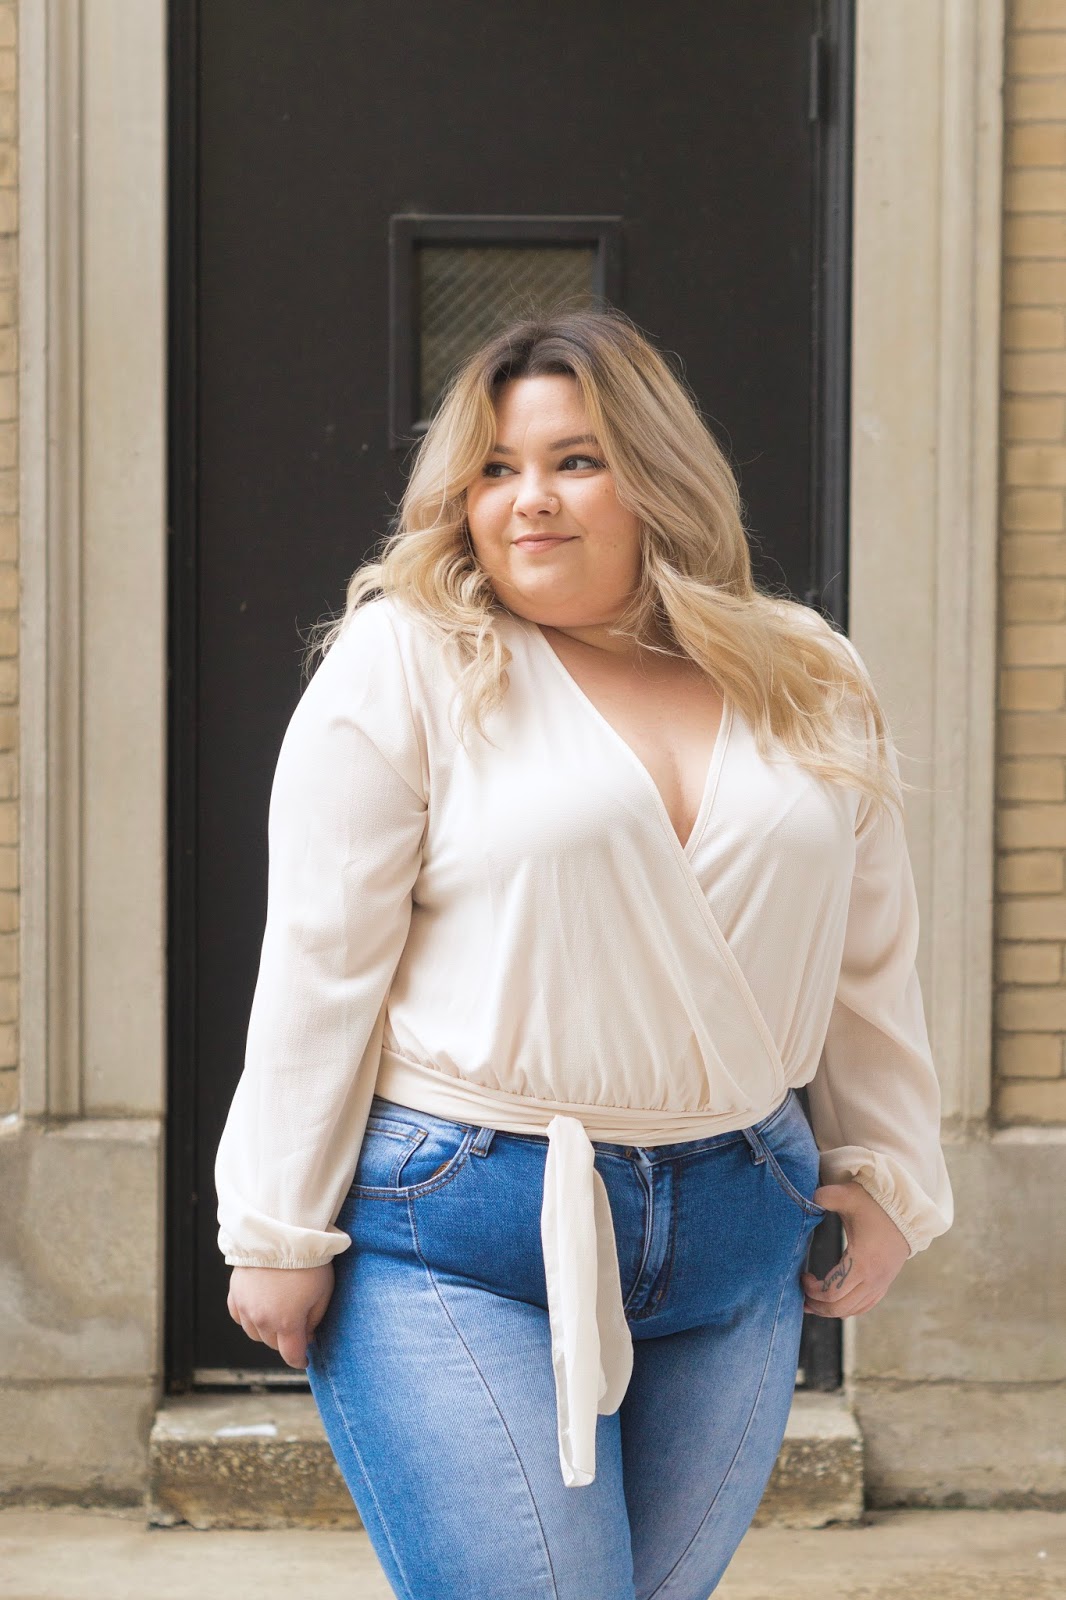 natalie in the city, natalie craig, Chicago fashion blogger, plus size fashion blogger, plus size Chicago model, fashion nova curve, fashion nova, blogger review, plus size pearl denim, affordable plus size clothing, plus size wrap top, trendy plus size clothing, embrace your curves, plus model magazine